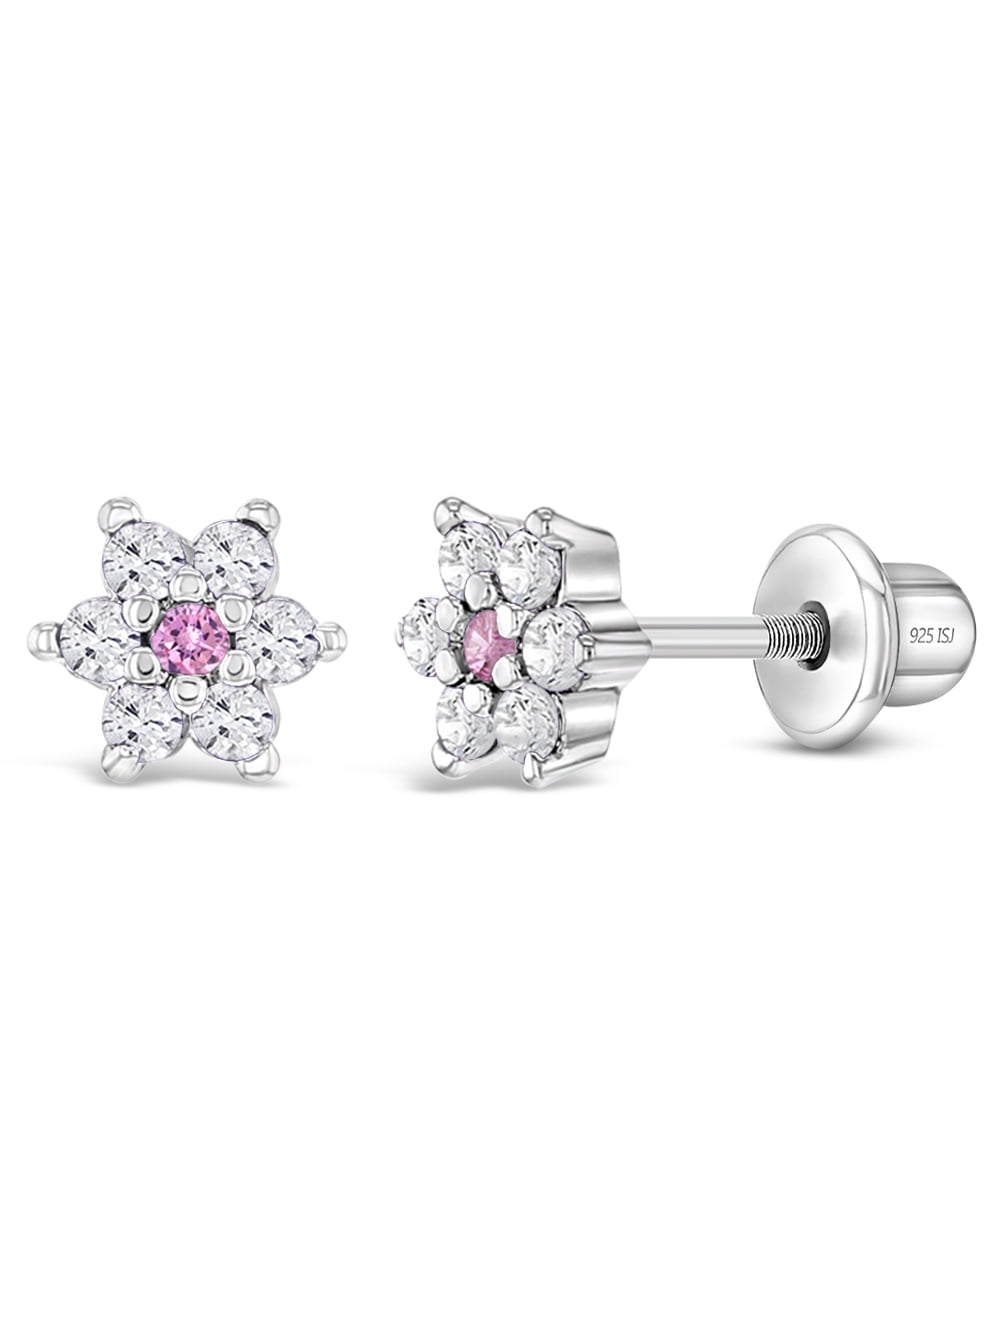 Details about   Rhodium Plated Extra Small Prong Set Crystal Baby Girl Screw Back Earrings 2mm 